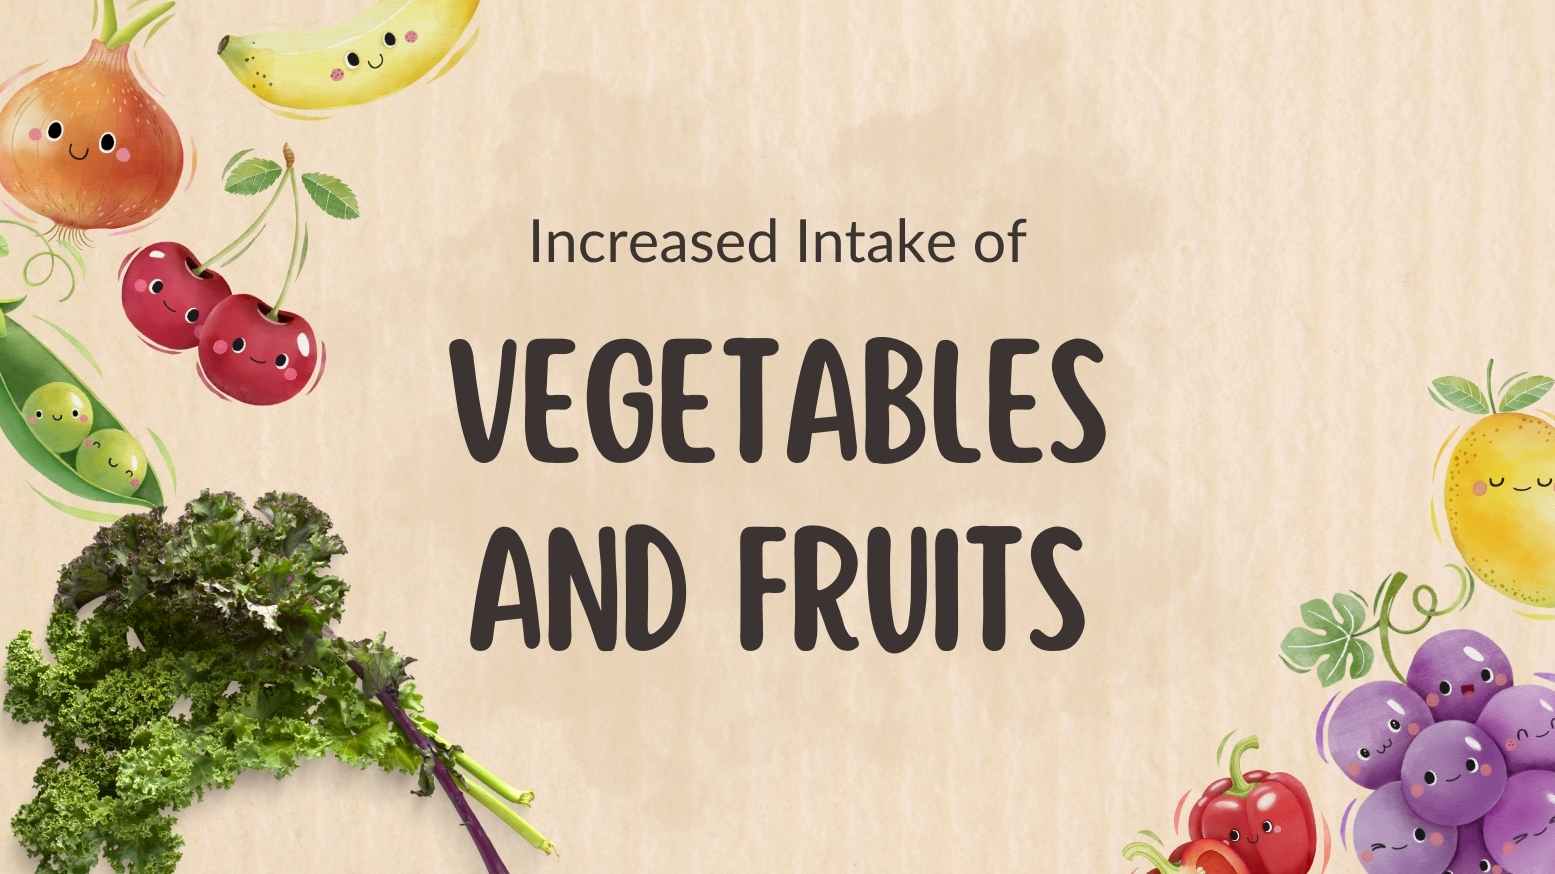 Increased Intake of Fruits and Vegetables